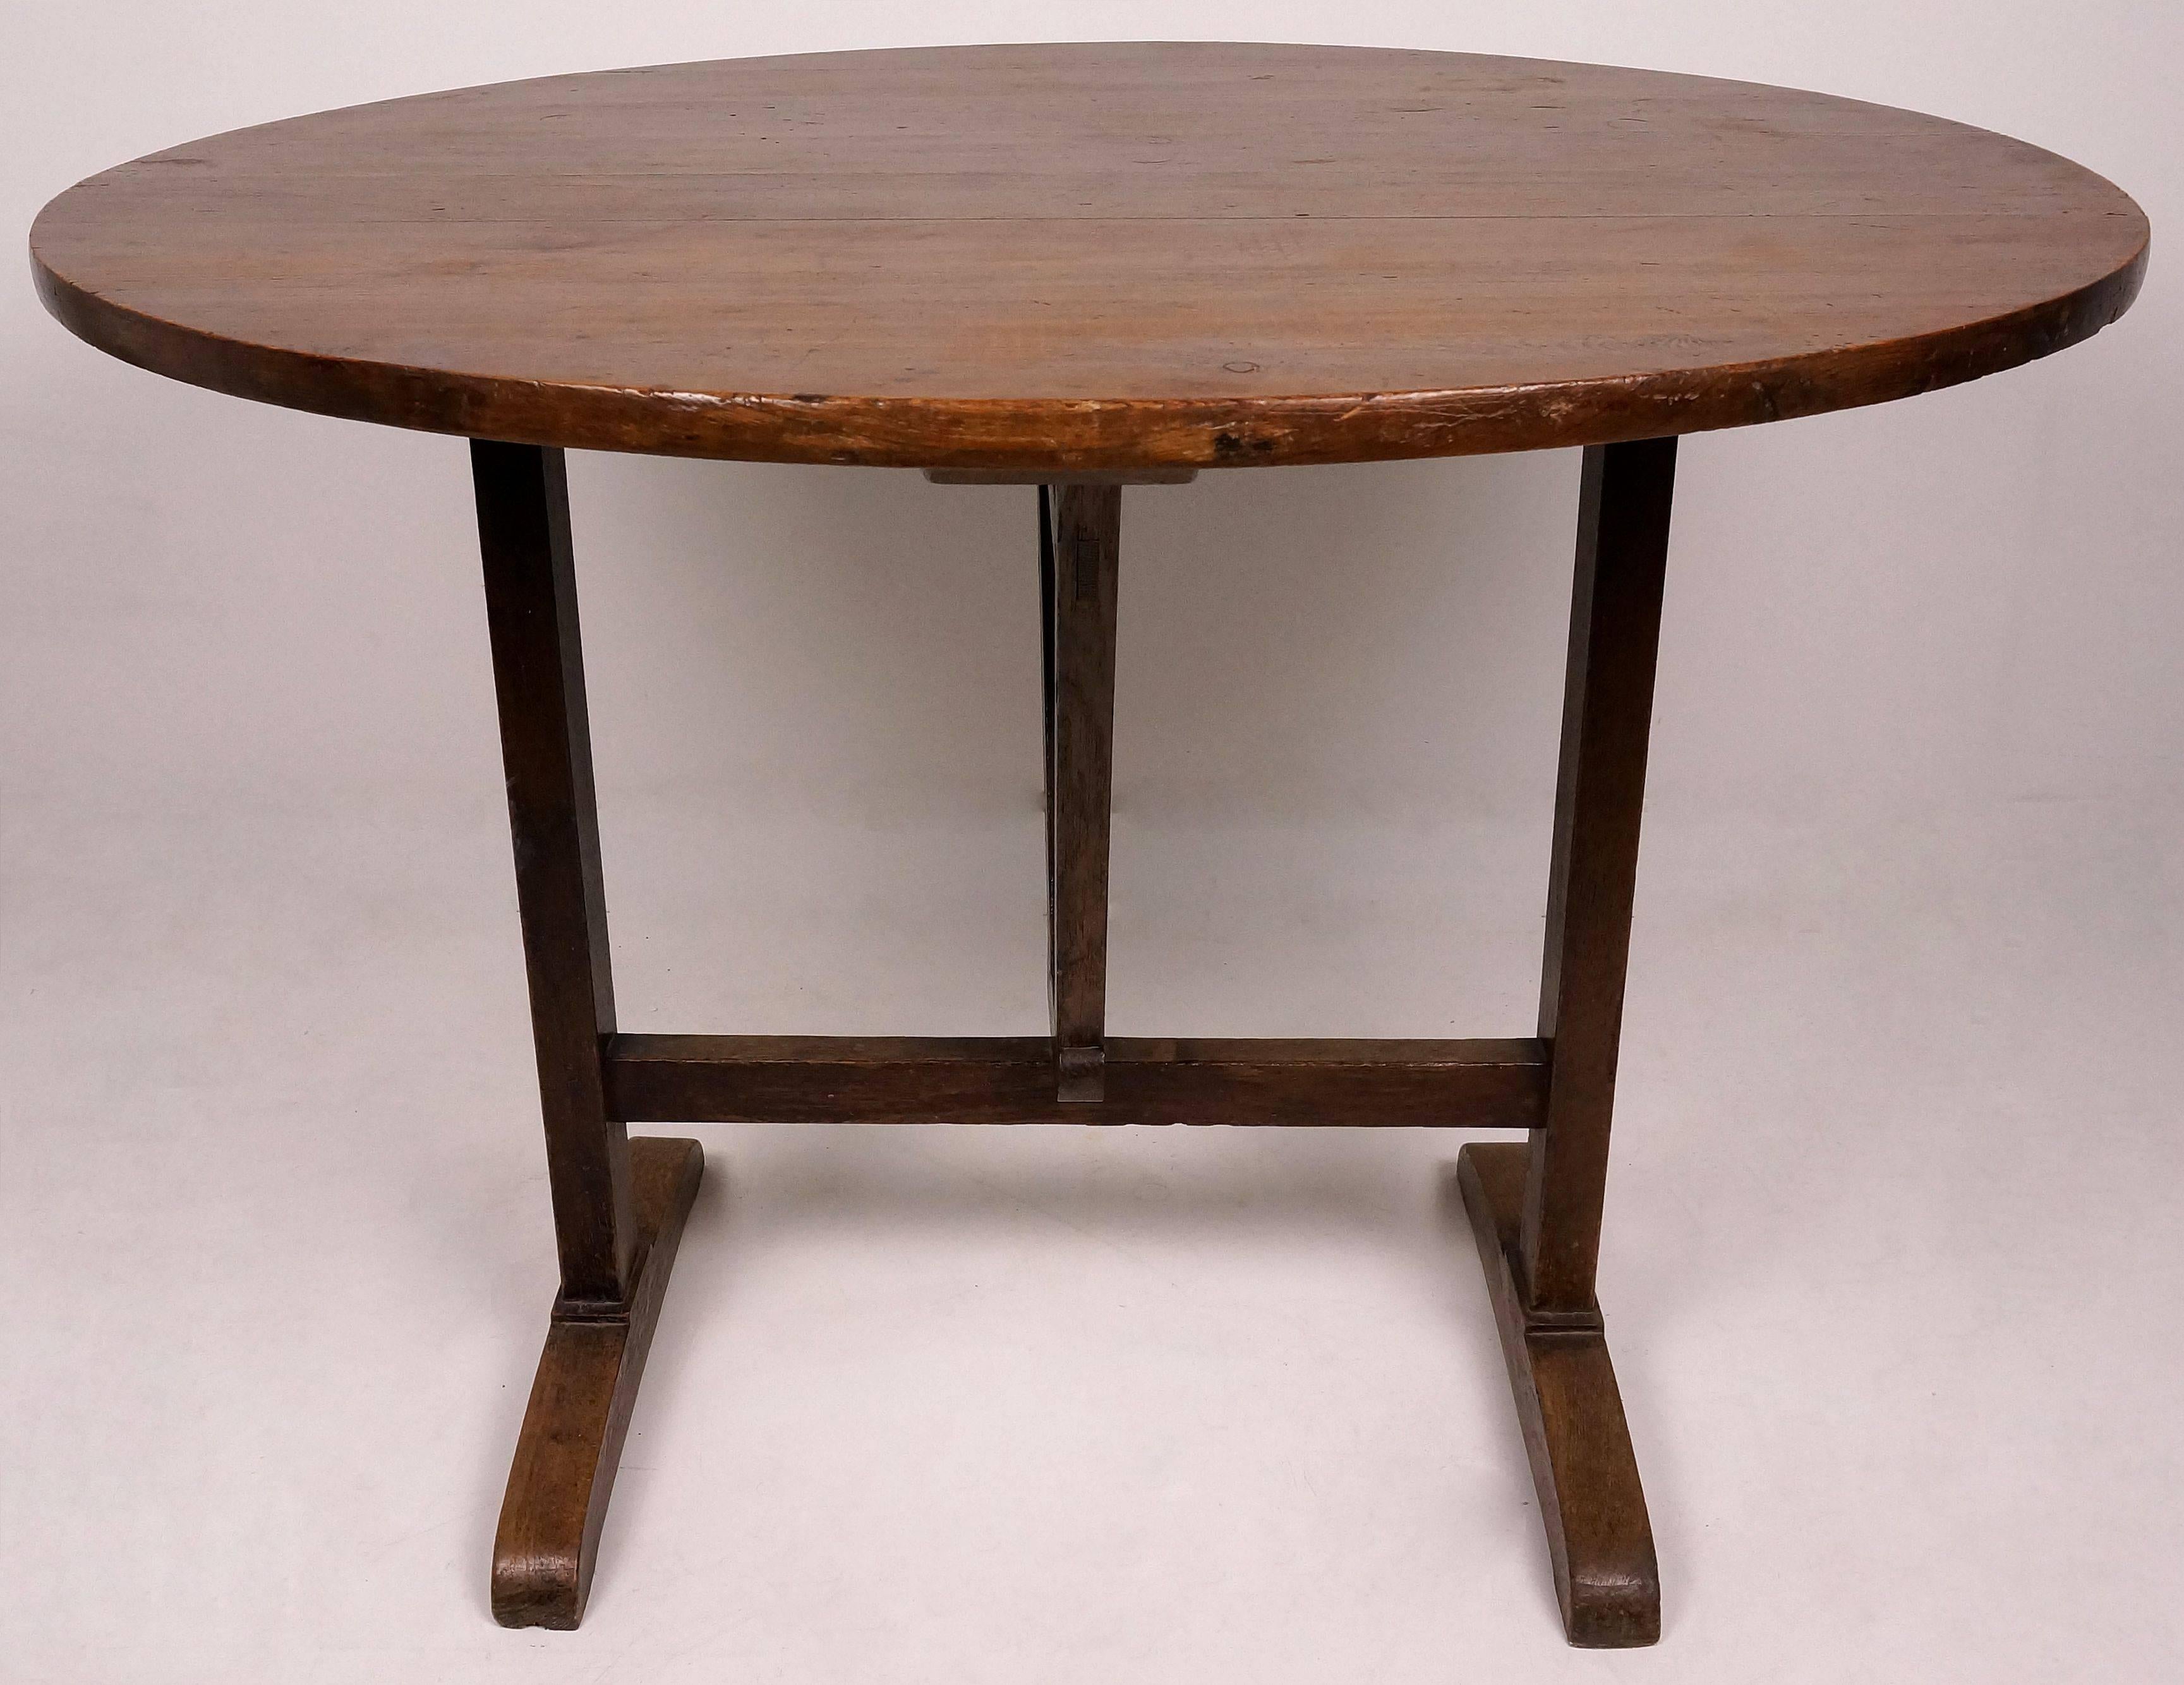 This French Provencal vendage wine tasting table with its trestle-base and wide-plank oval-top is from the late 19th century and is fabricated of oak and pine which has mellowed to a beautiful dark lustrous coloration.  

The oval-top easily